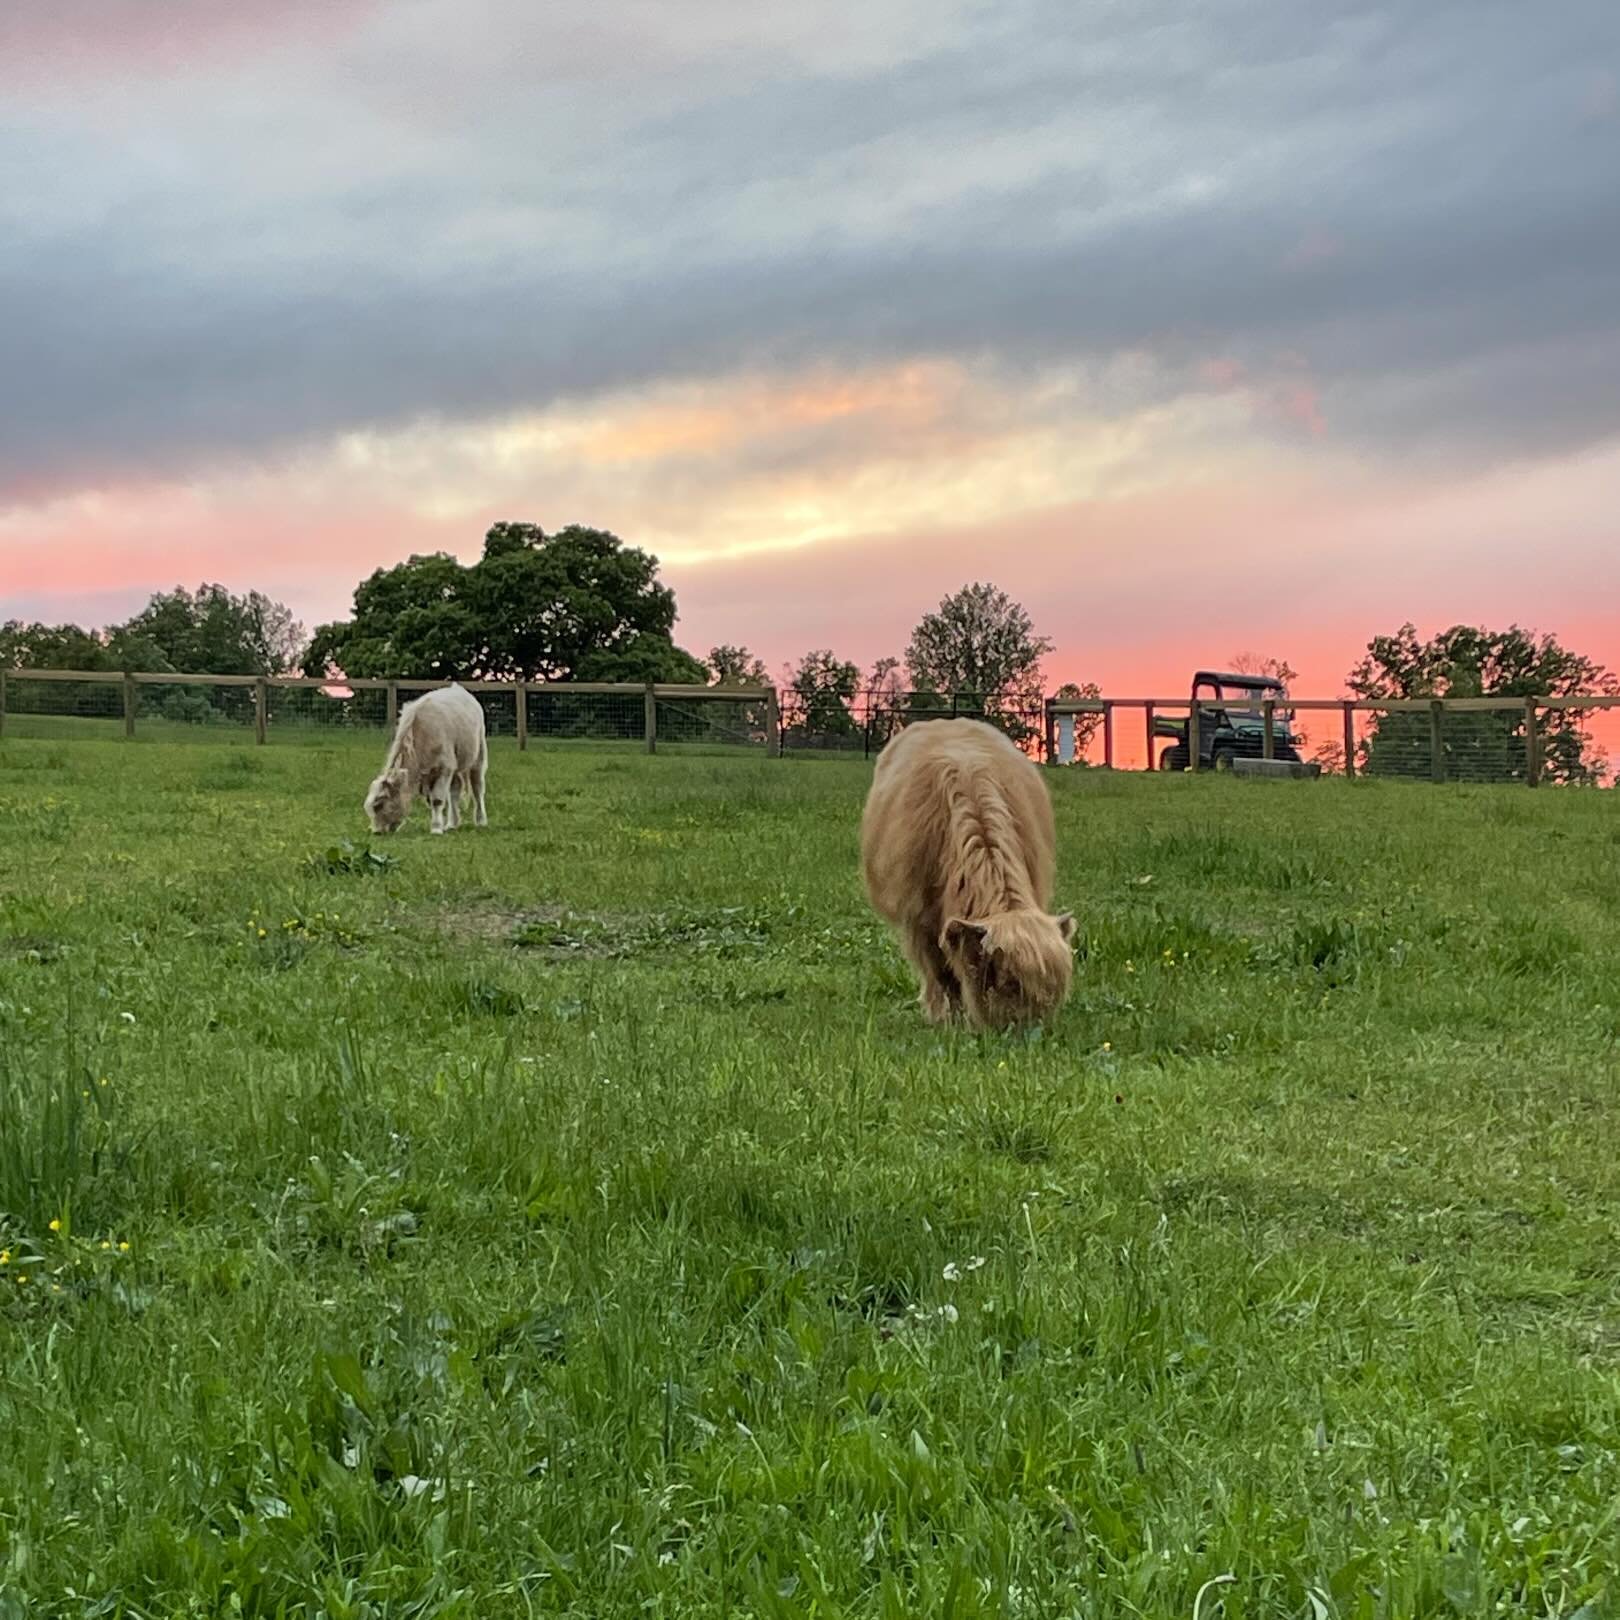 The sky was perfect last night for some 🐮🐮📸 #cows #highlandcows #minicows #cowsofinstagram #berkscounty #pennsylvania